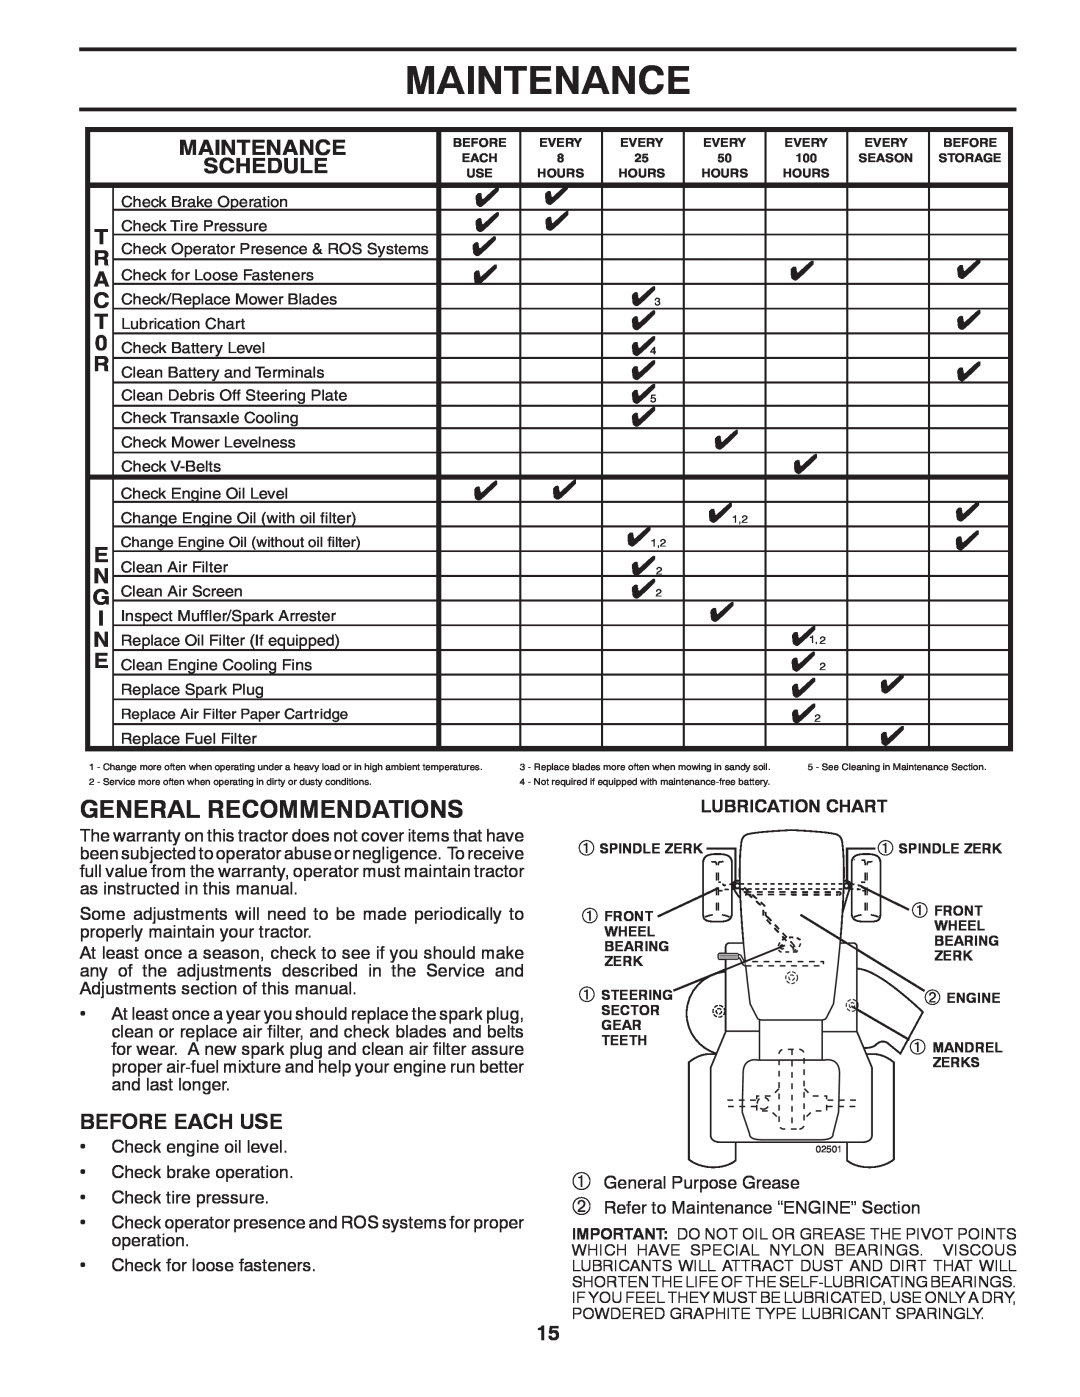 Dixon D26BH54, 434722 manual Maintenance, General Recommendations, Schedule, Before Each Use 